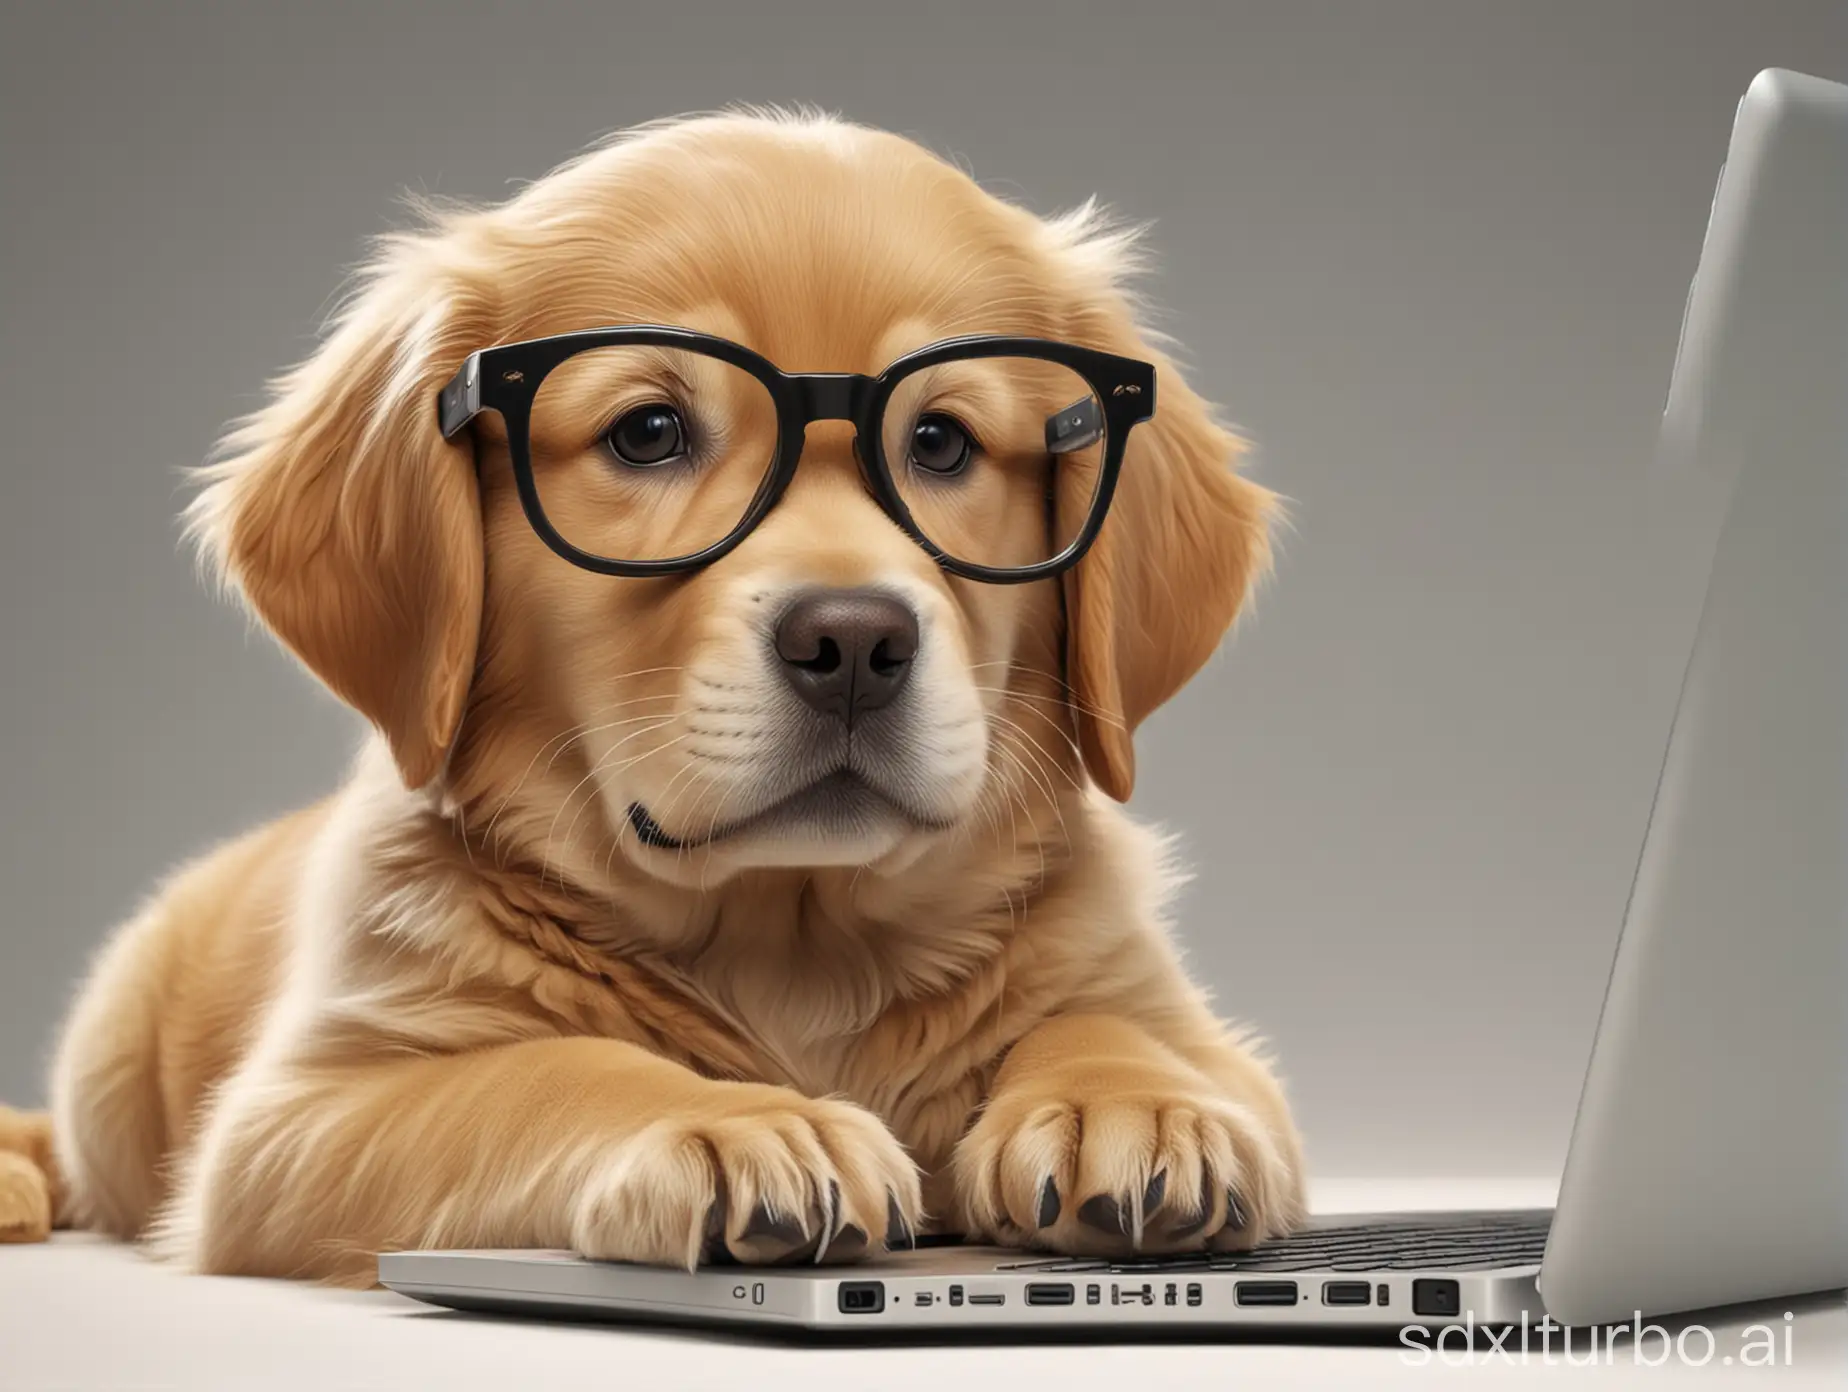 Adorable-Golden-Retriever-Puppy-Wearing-Glasses-Engaged-in-HighTech-Learning